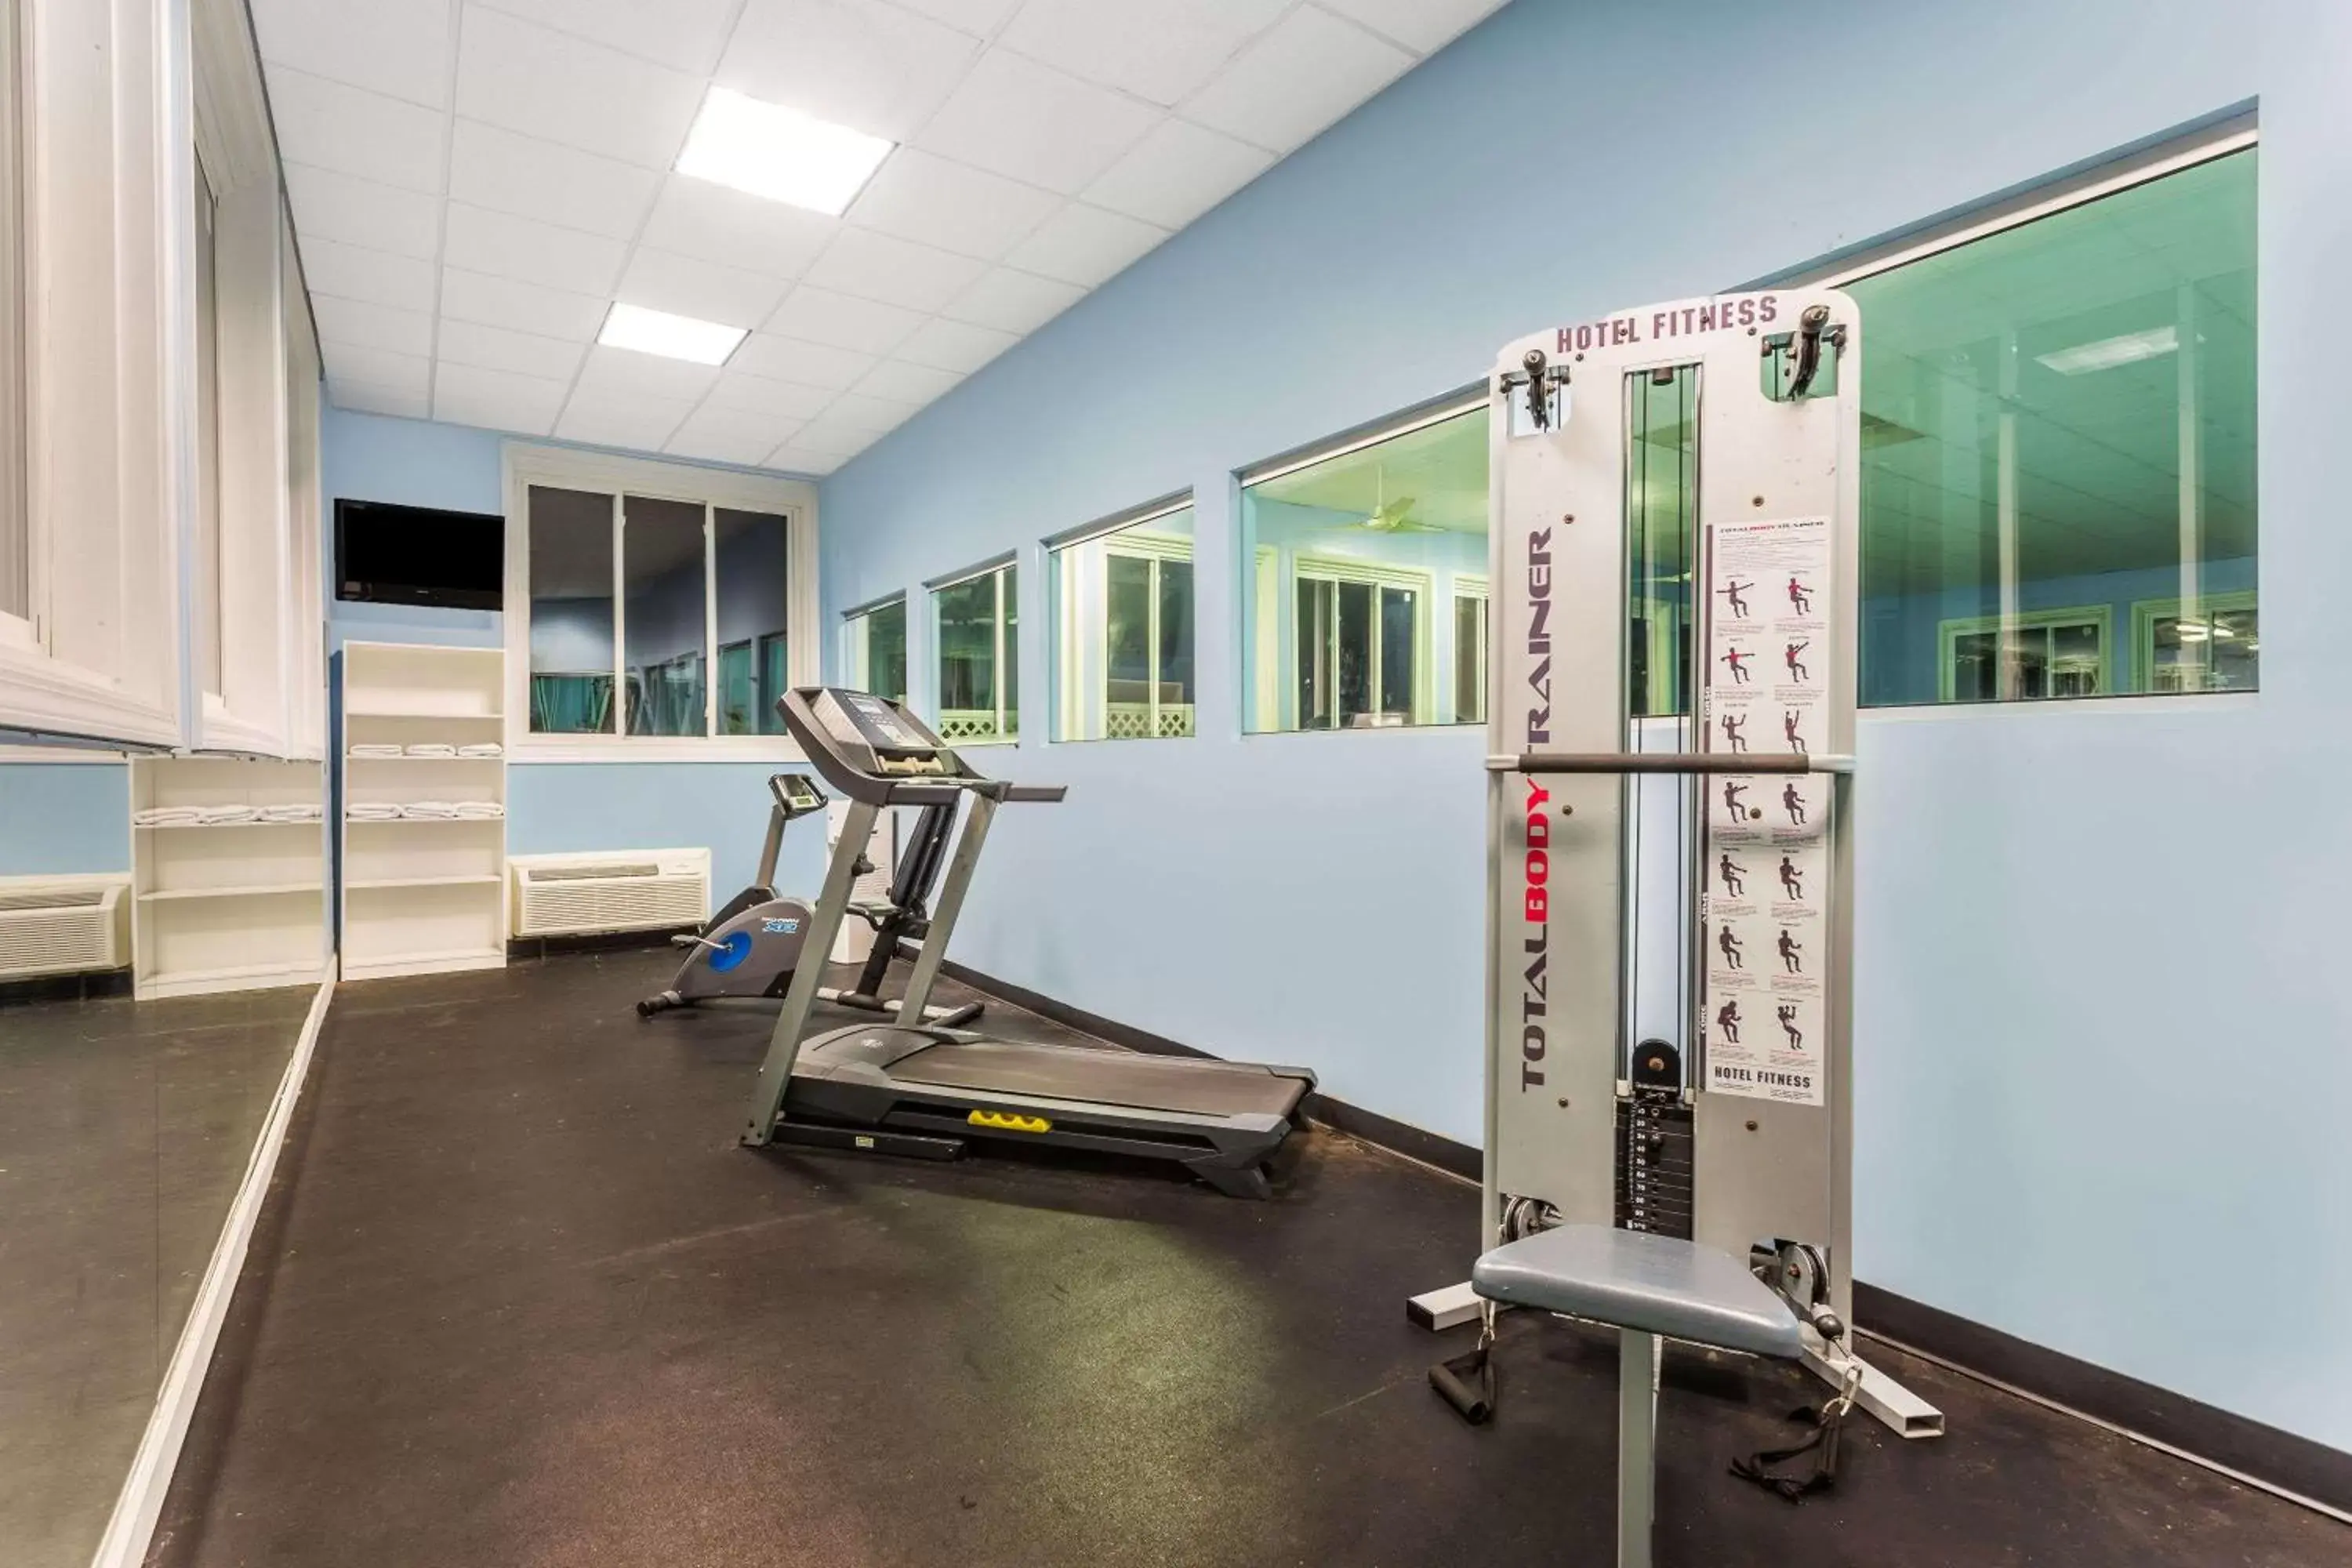 Fitness centre/facilities, Fitness Center/Facilities in Baymont by Wyndham Cornelia